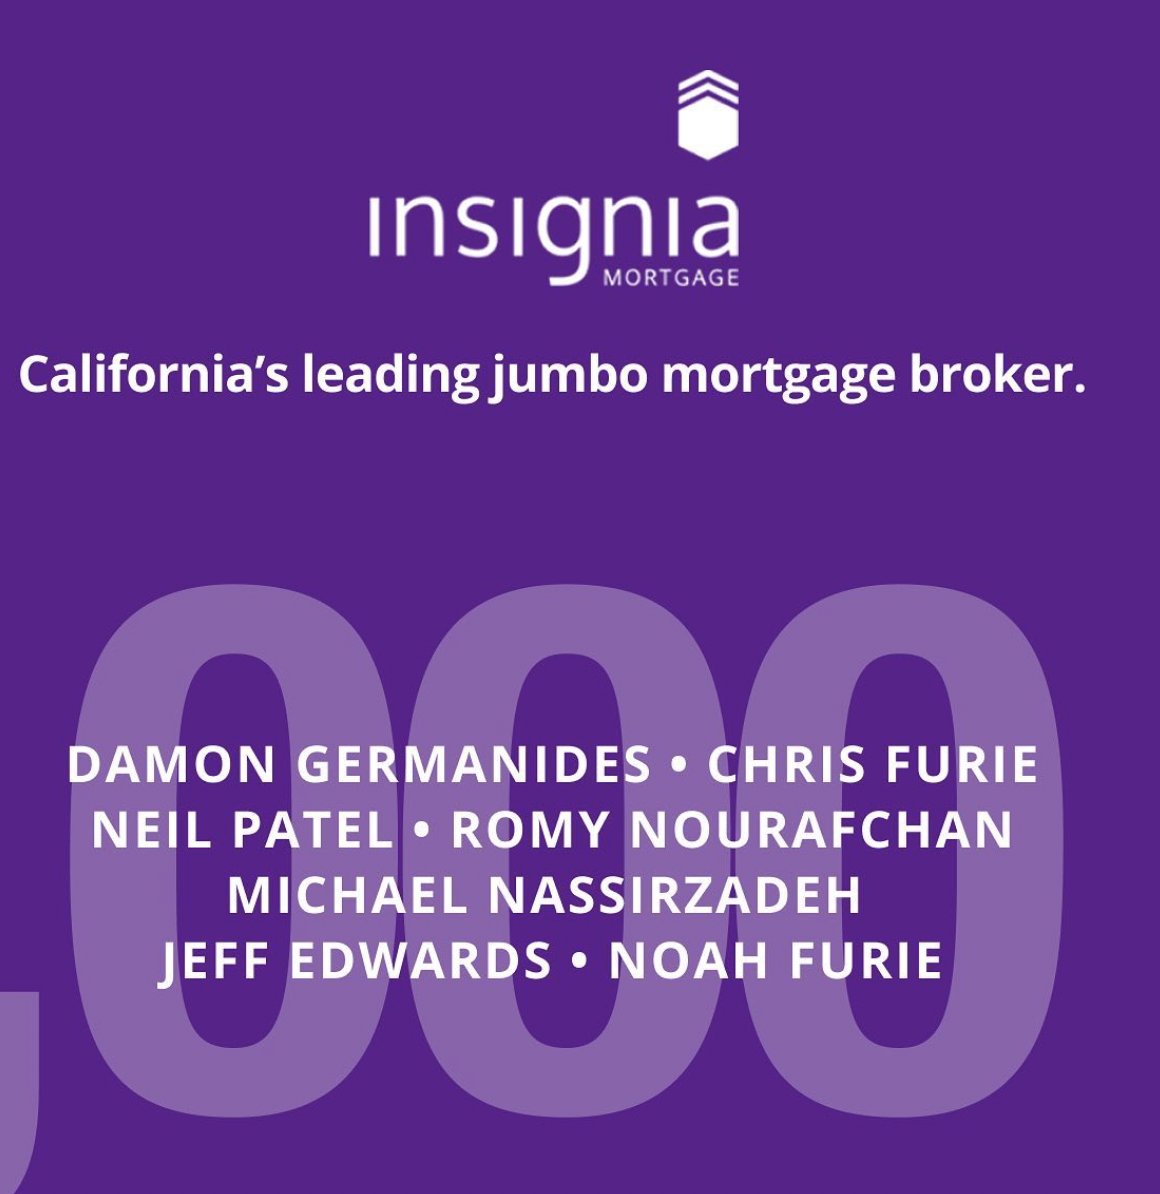 Congrats to the Insignia Mortgage team on over $750,000,000 in loan origination for 2022! Looking forward to seeing what we can do for 2023.

#mortgagebroker #realestate #loanbroker #beverlyhills #california #insigniamortgage #jumboloan